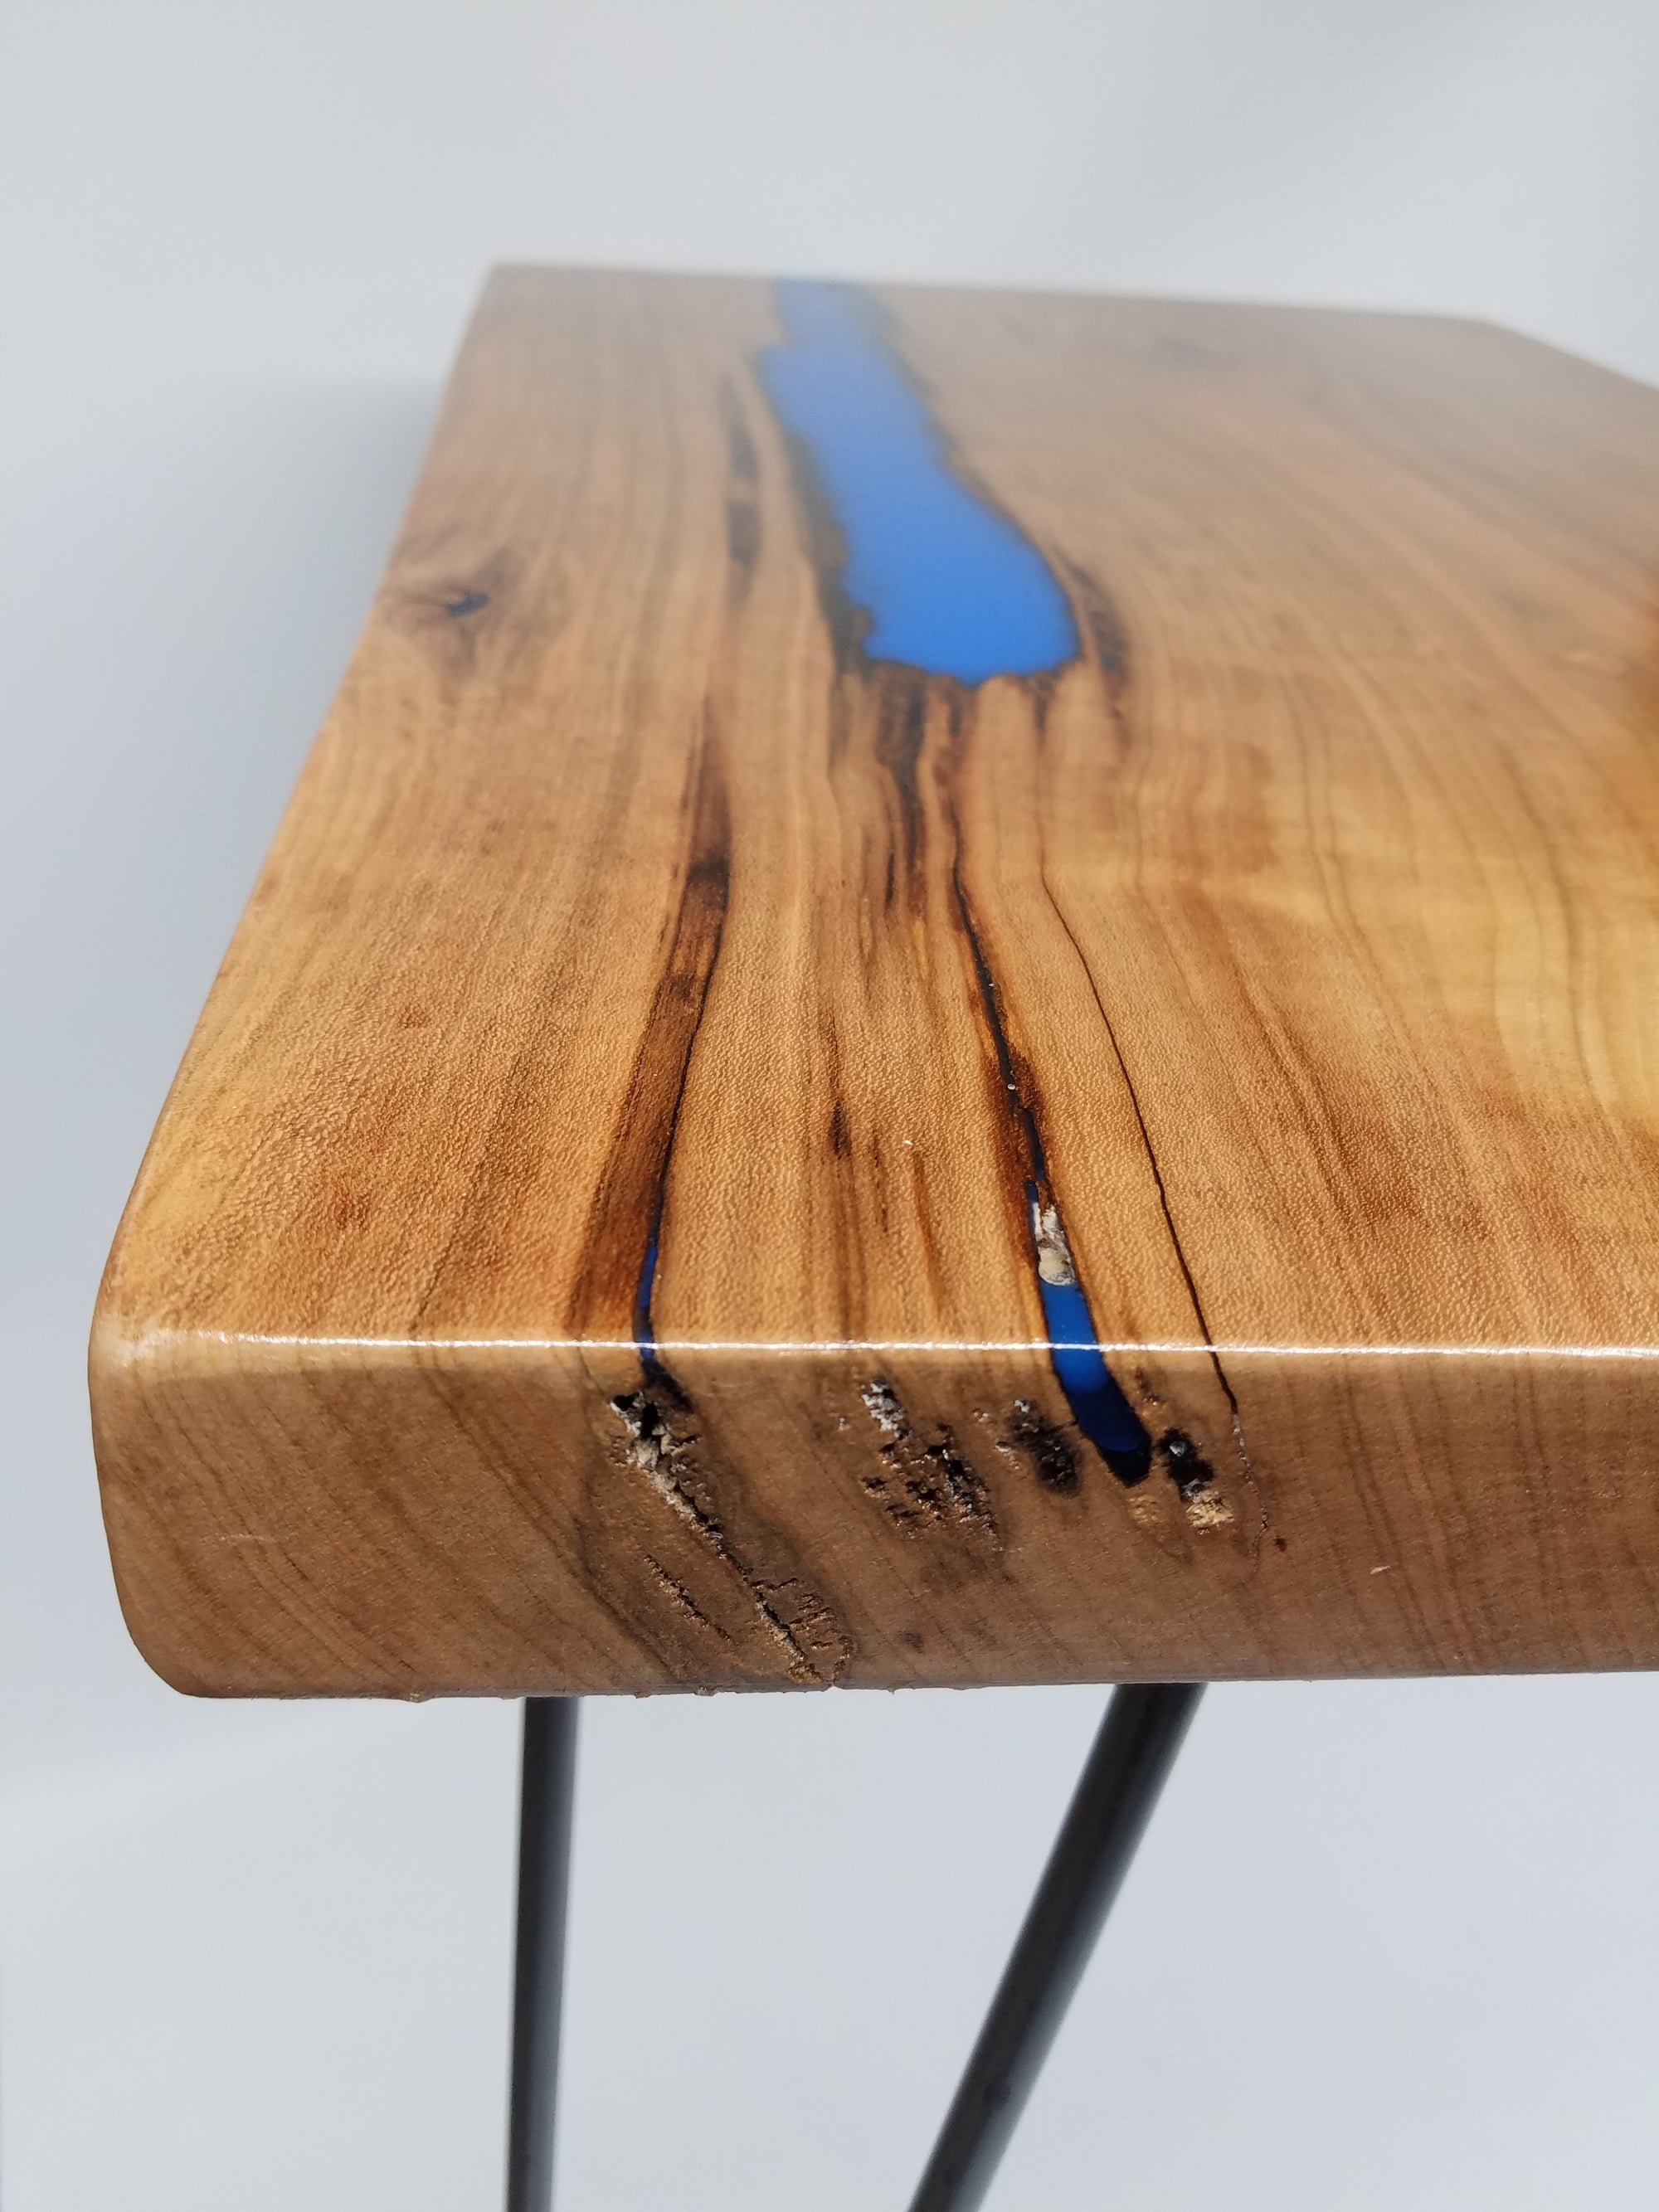 River Table- Side Table- End Table- Reclaimed Wood- Cherry Slab- Blue- Unique Table- Zero VOC Finish- Urban Salvaged Wood- Handmade- Unique